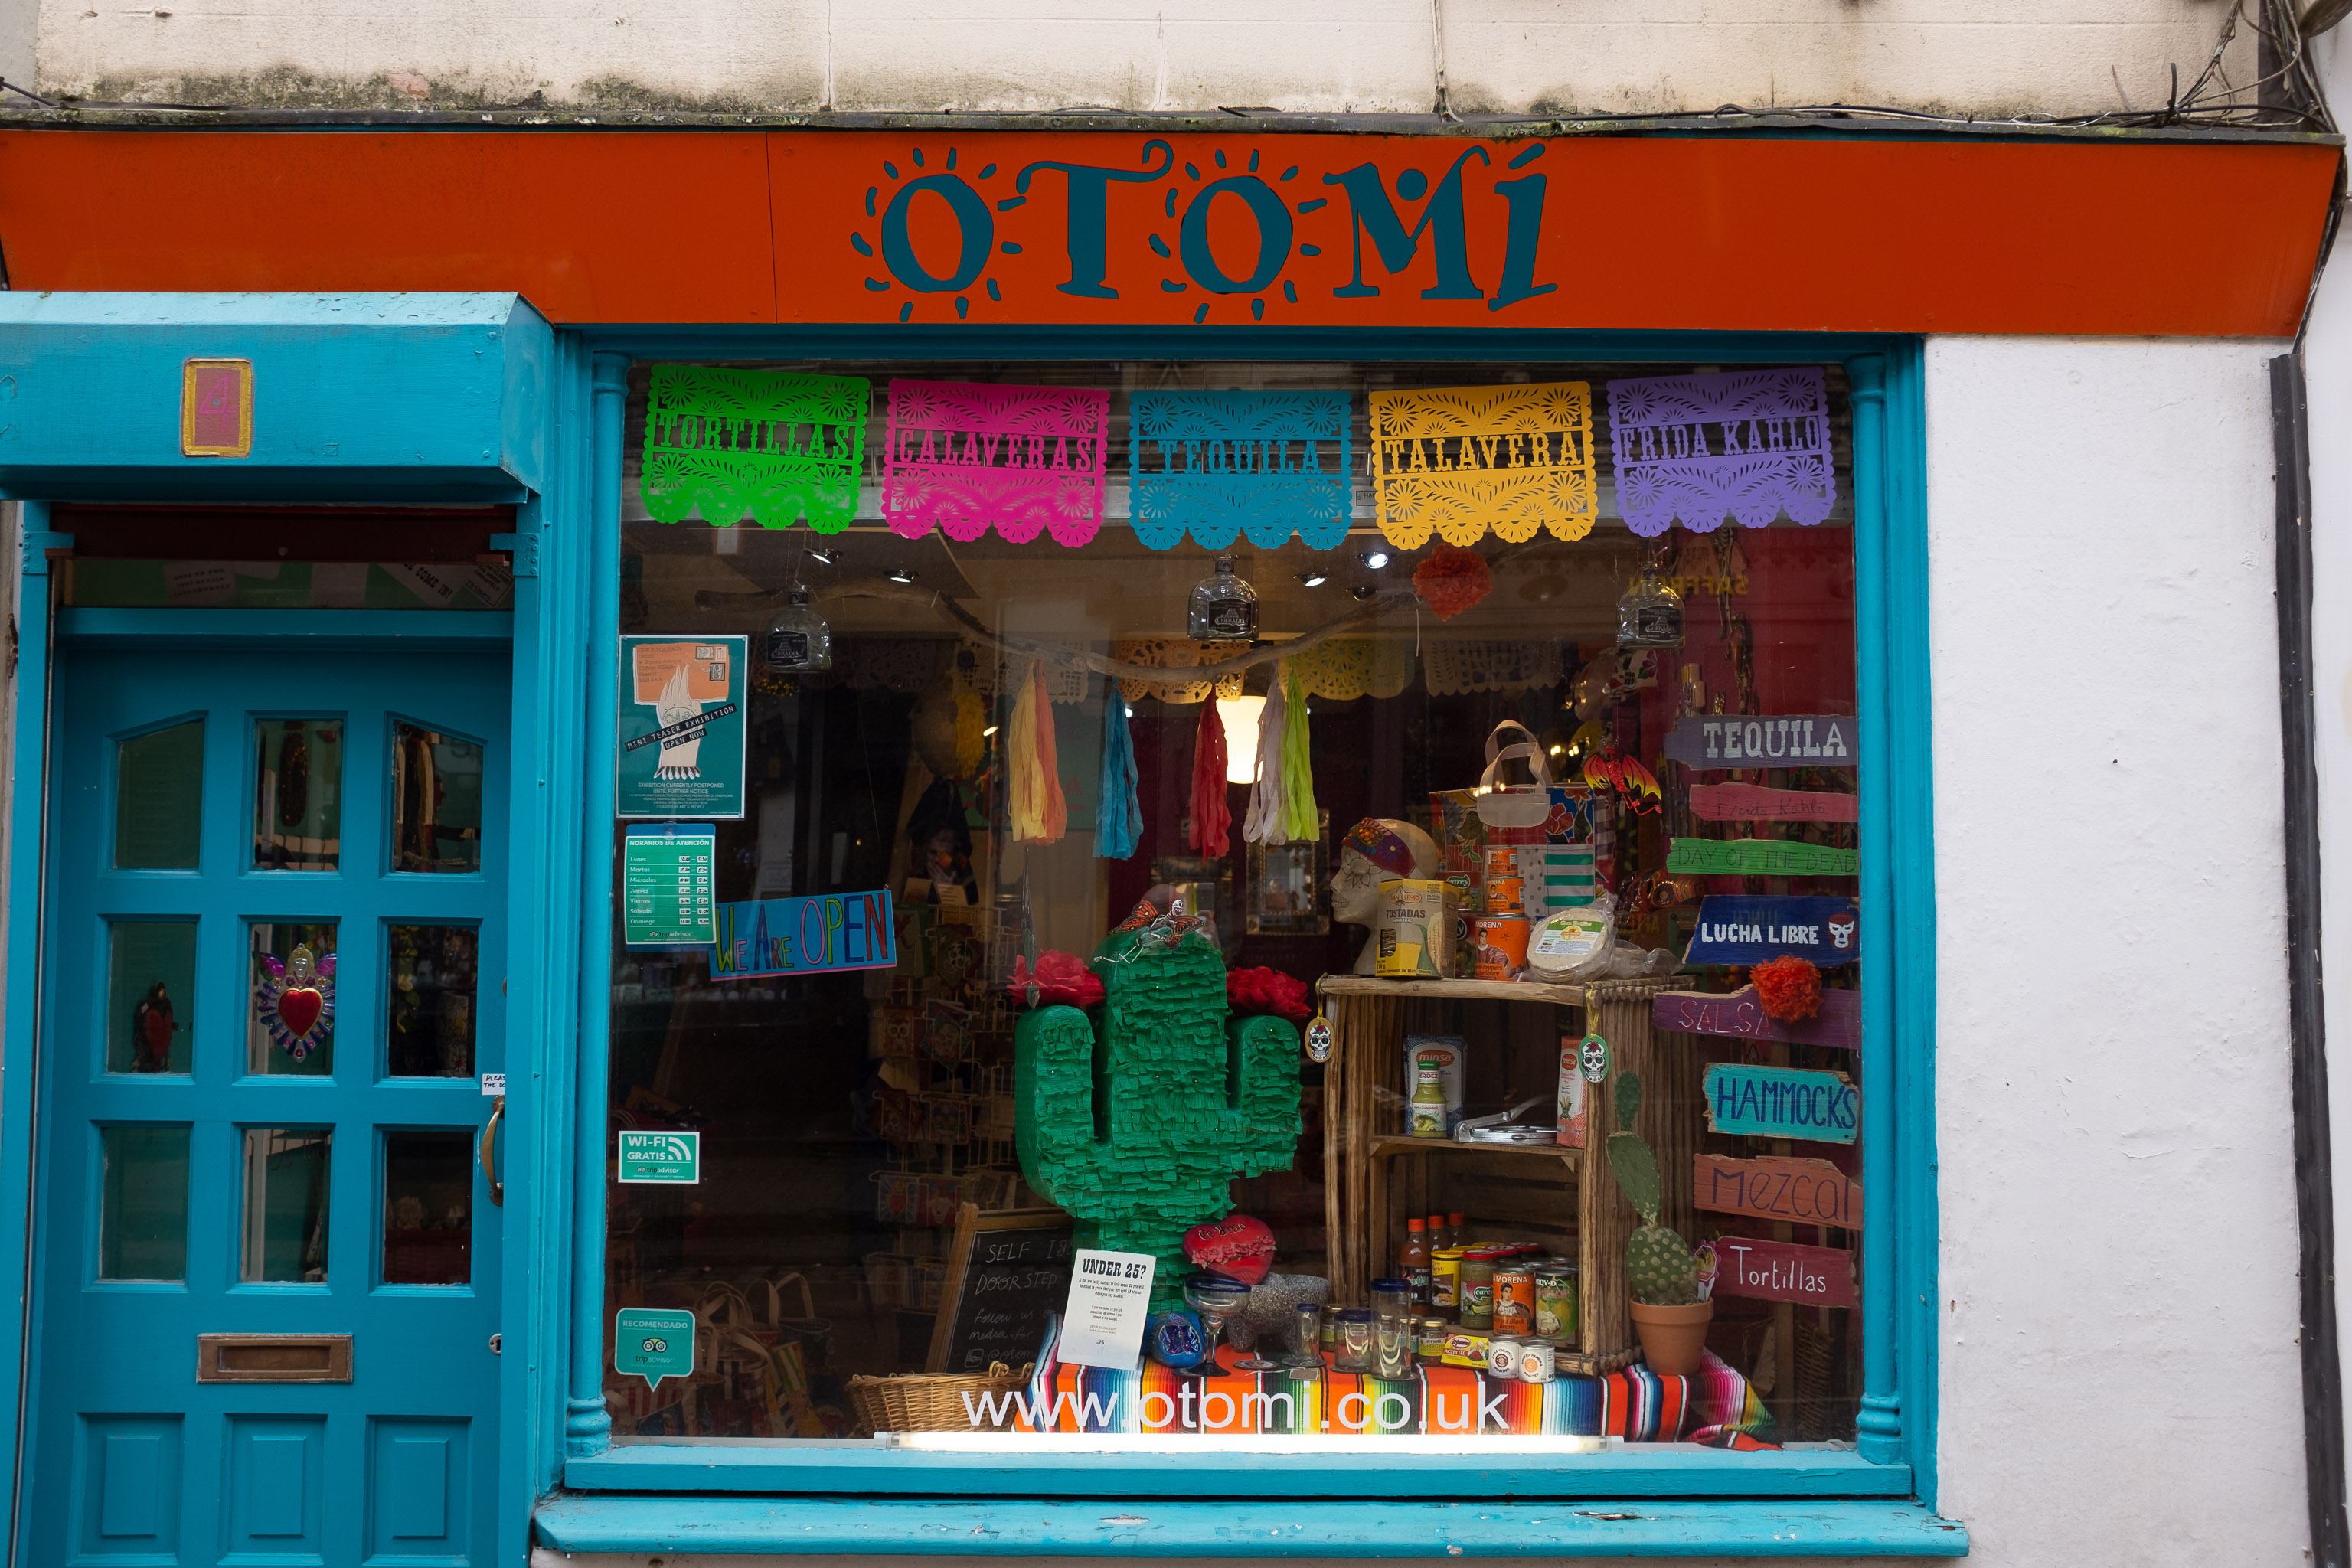 OTOMI
Hard to resist snapping Otomi's colourful frontage as I head for Twelve to get a coffee.
